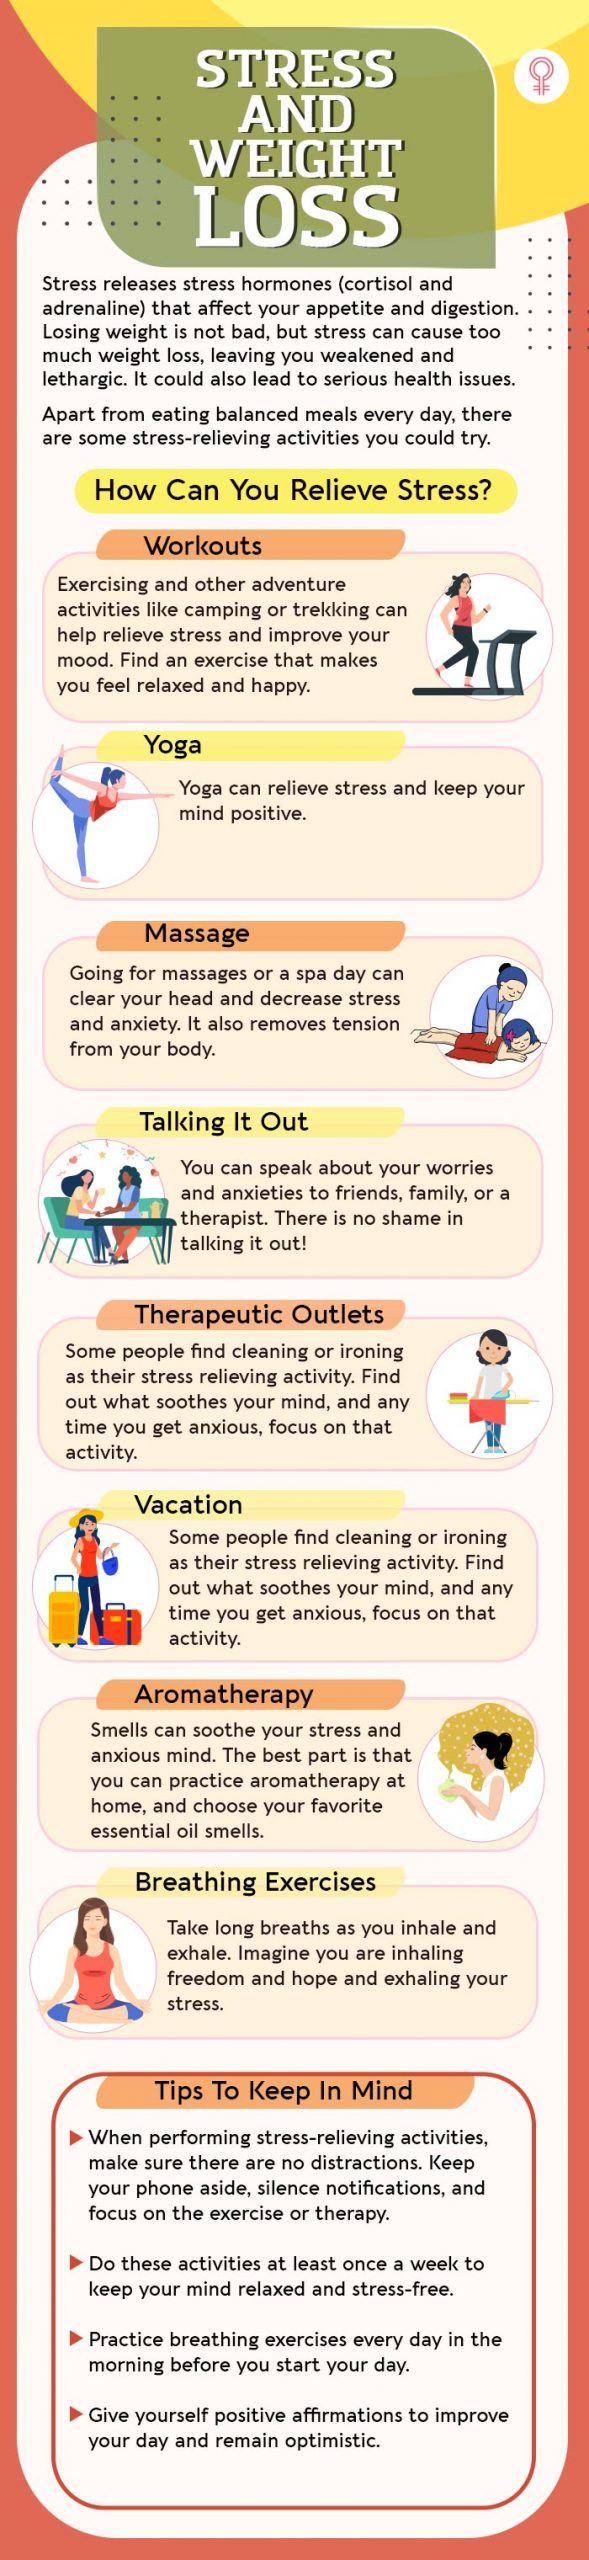 tips to control weight loss due to stress (infographic)